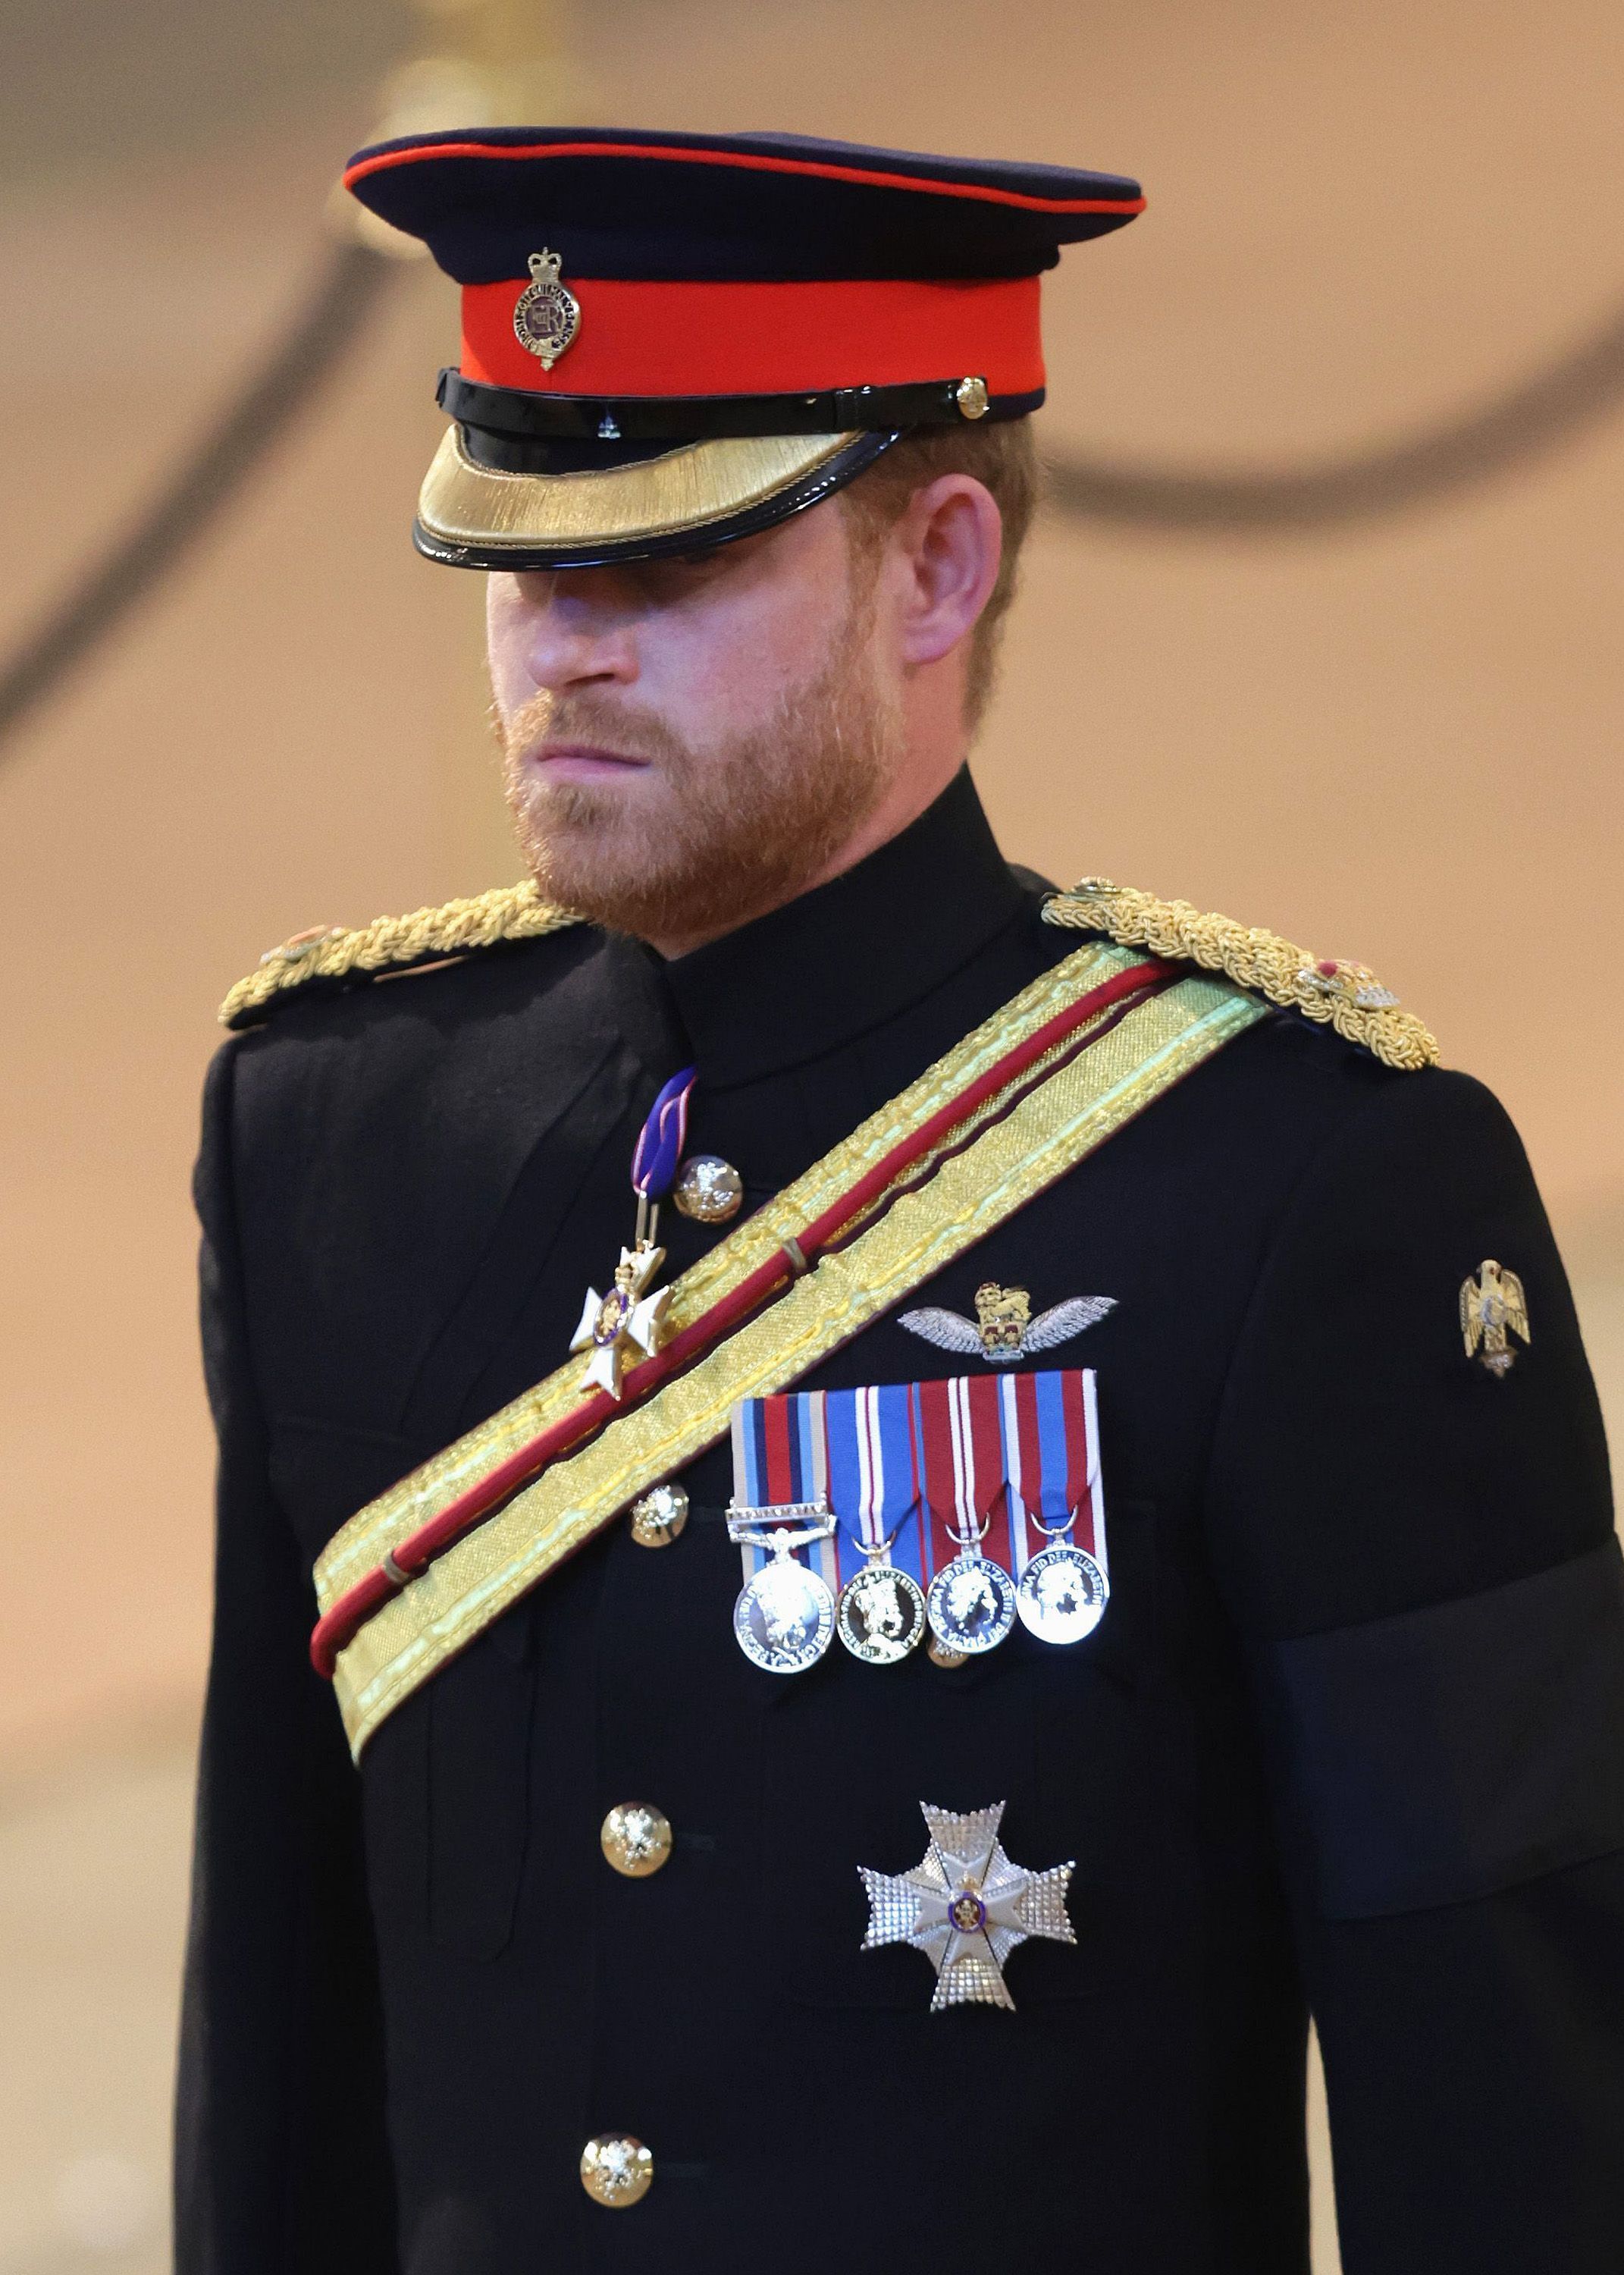 <p><a href="https://www.wonderwall.com/celebrity/profiles/overview/prince-harry-481.article">Prince Harry</a>, Duke of Sussex held vigil to honor grandmother Queen Elizabeth II, with his cousins, at Westminster Hall at the Palace of Westminster in London on Sept. 17, 2022, during the late monarch's lying-in-state ahead of her Sept. 19 funeral. King Charles III permitted Harry, a British army veteran, to wear his uniform despite no longer being a working royal. </p>